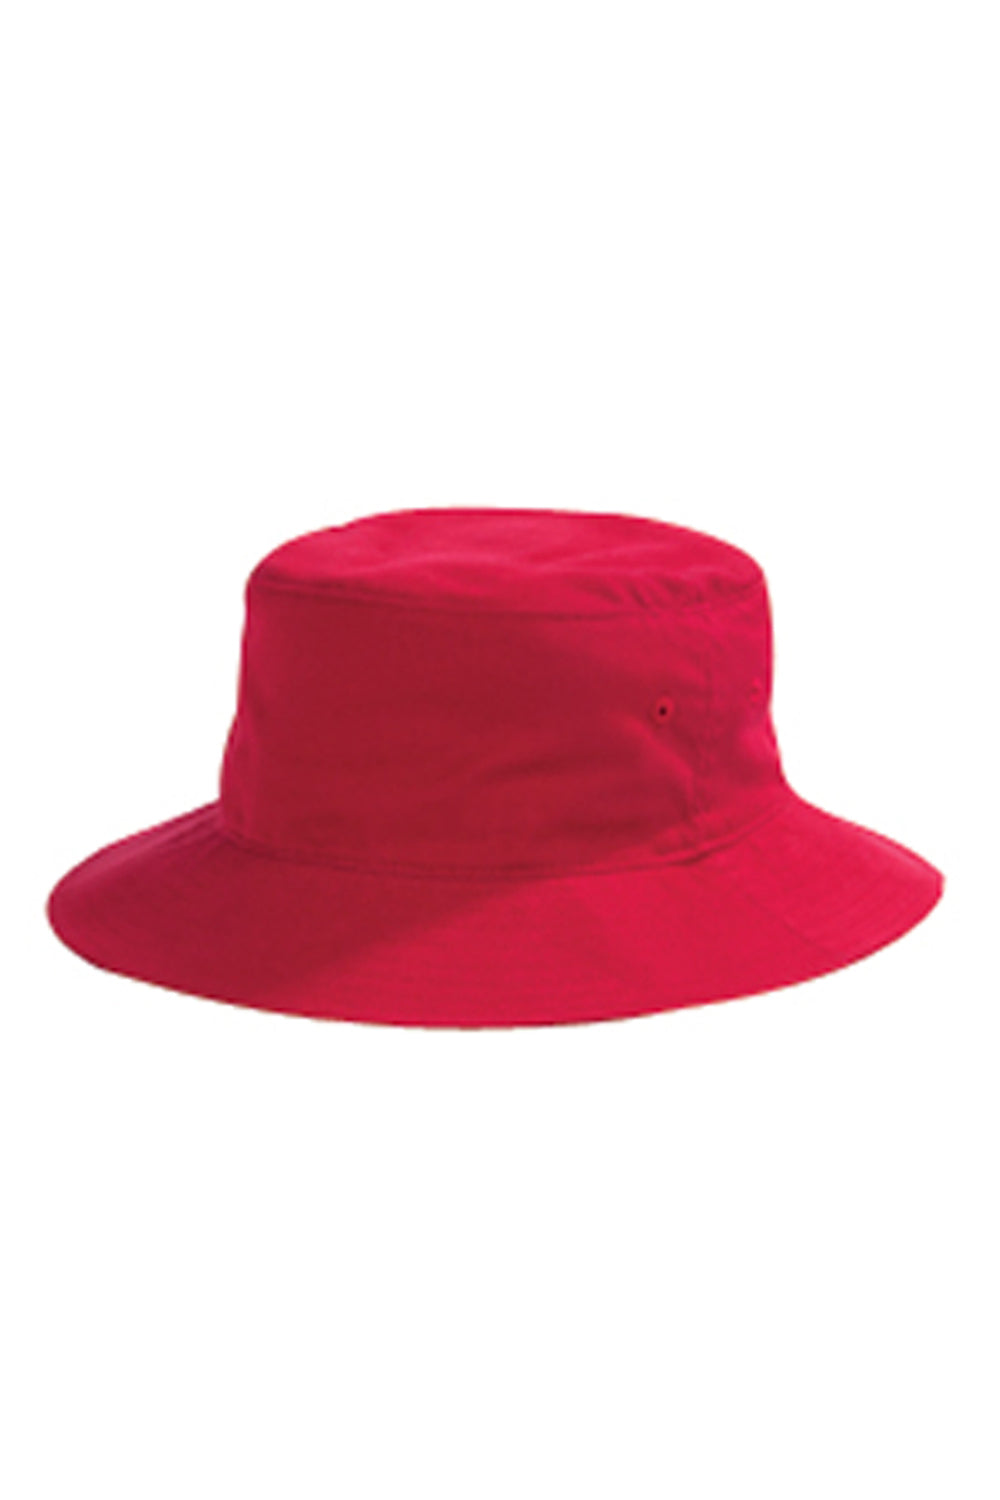 Big Accessories BX003 Mens Crusher Bucket Hat Red Flat Front